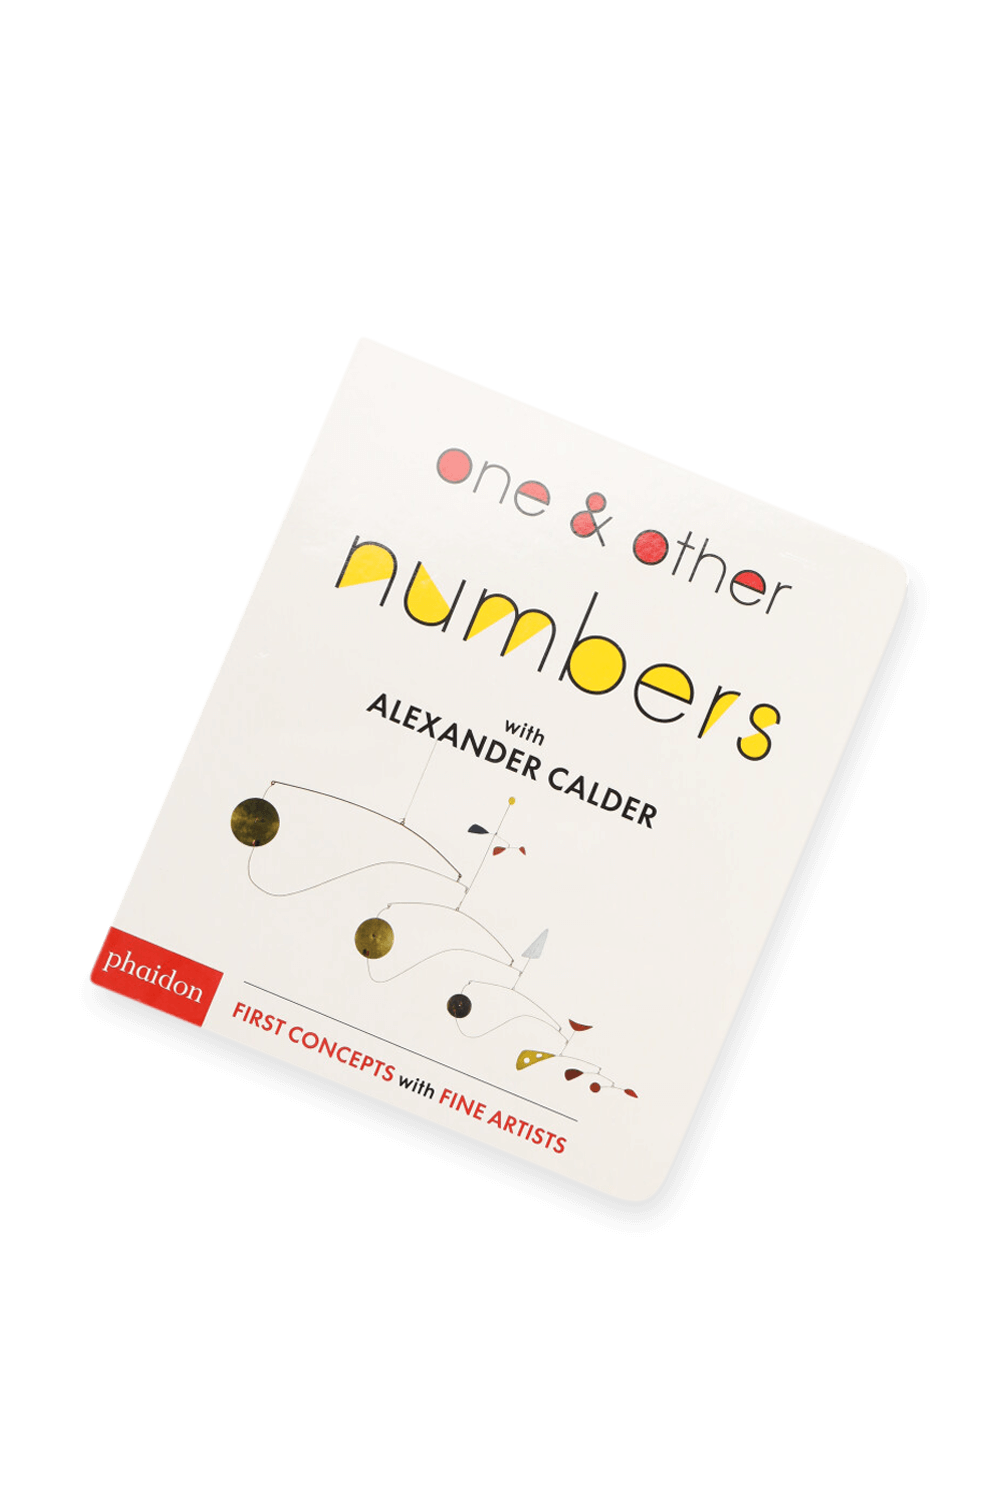 One & Other Numbers PHAIDON